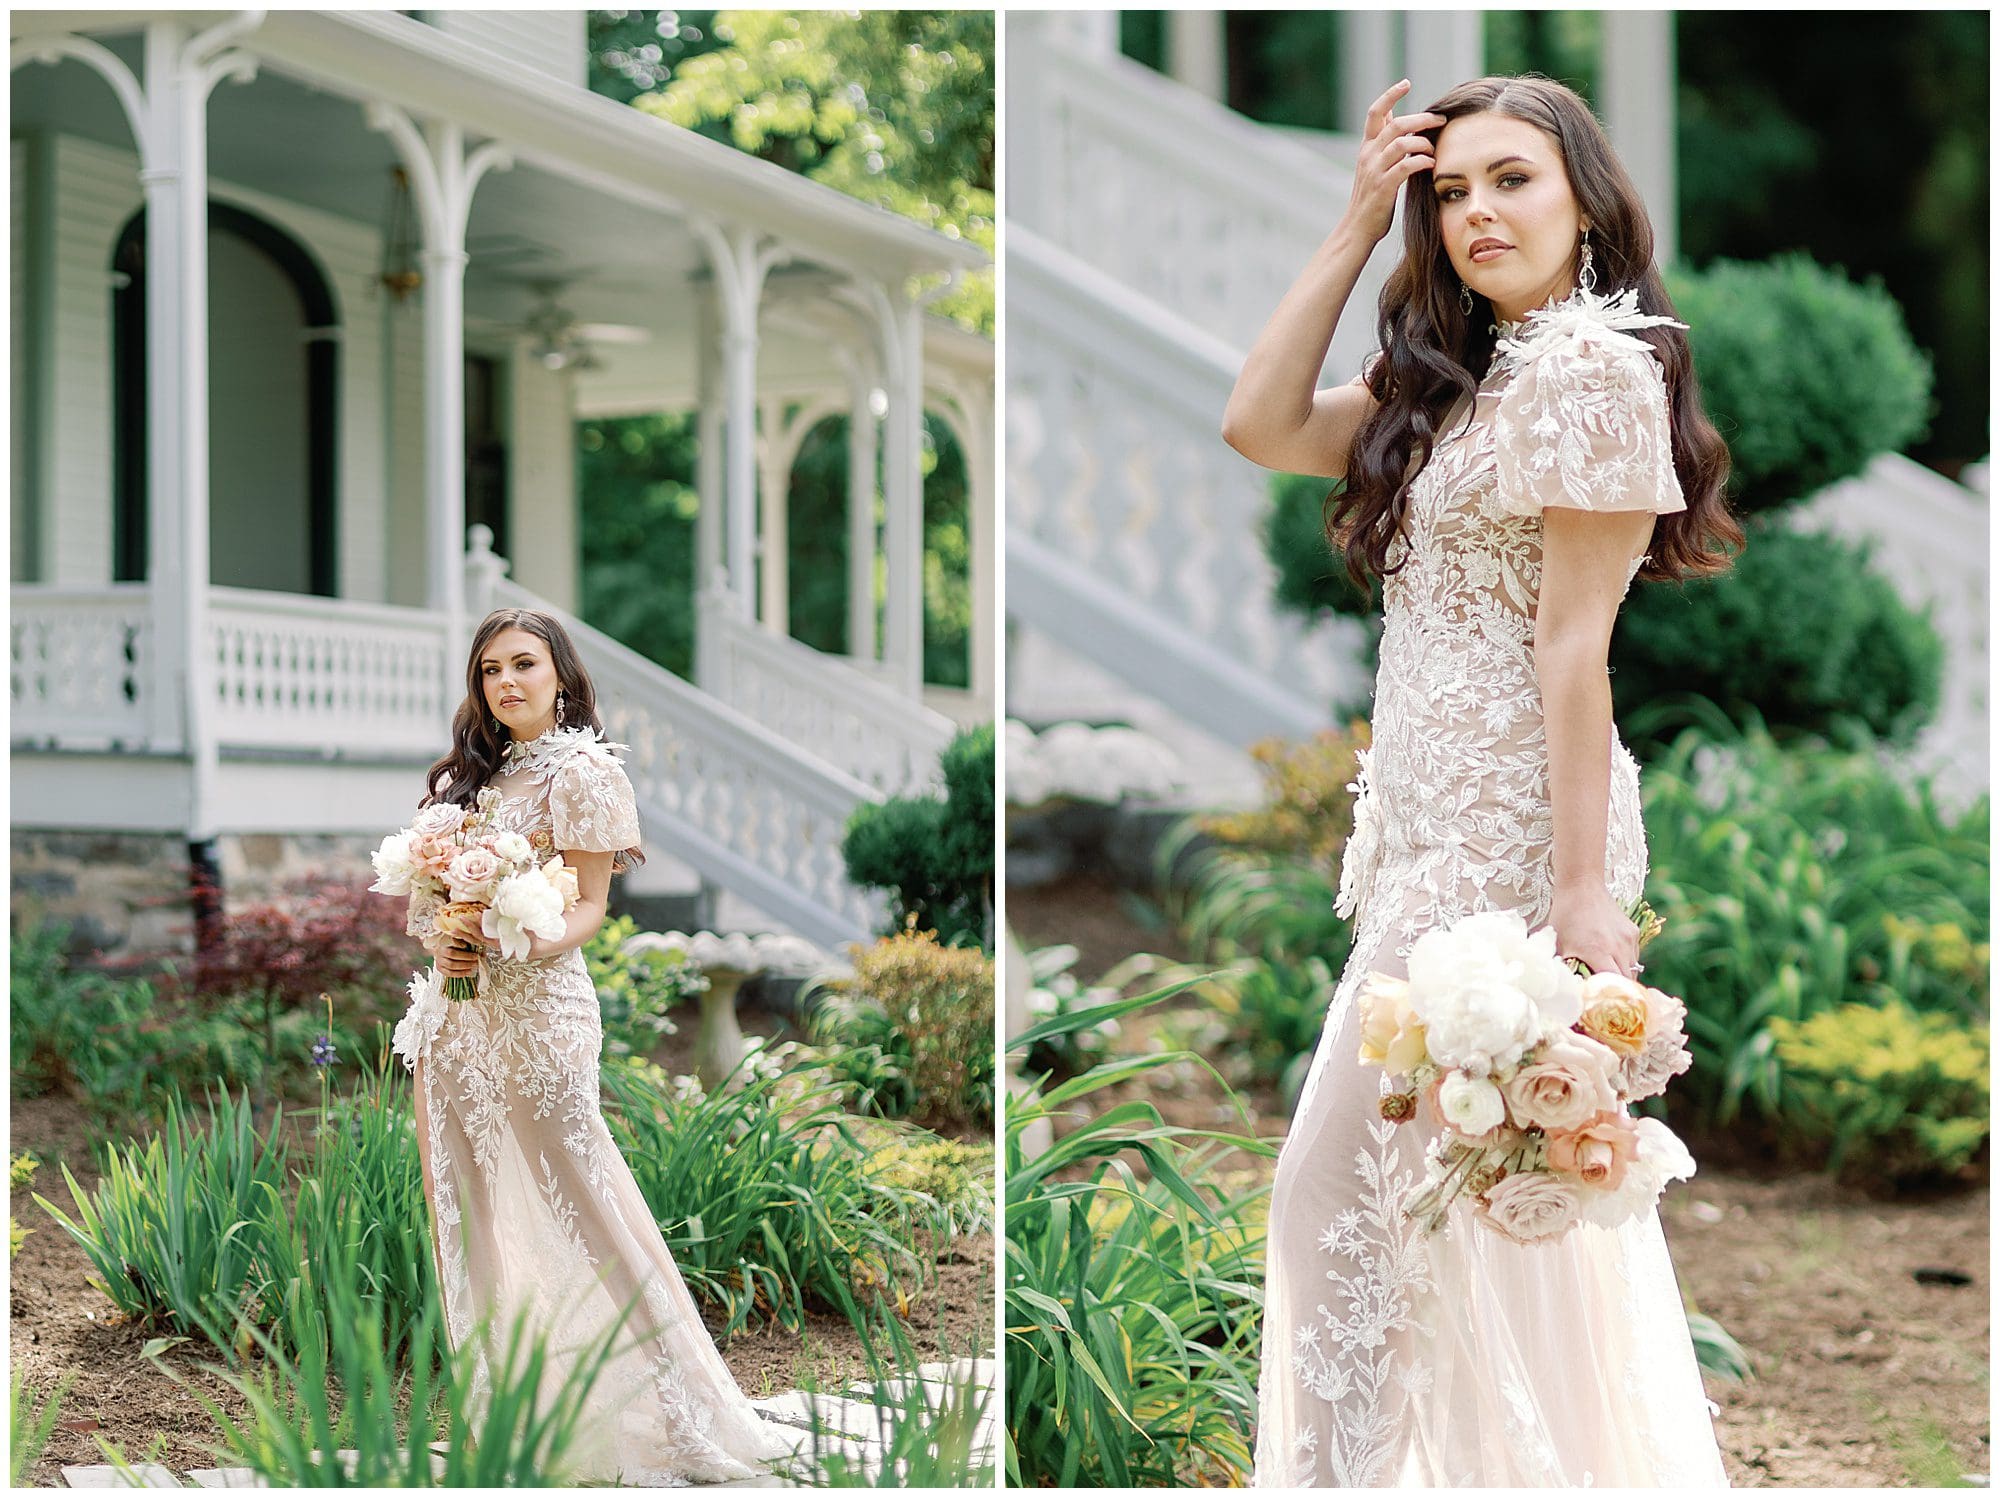 A bride in a wedding dress posing in front of a house.